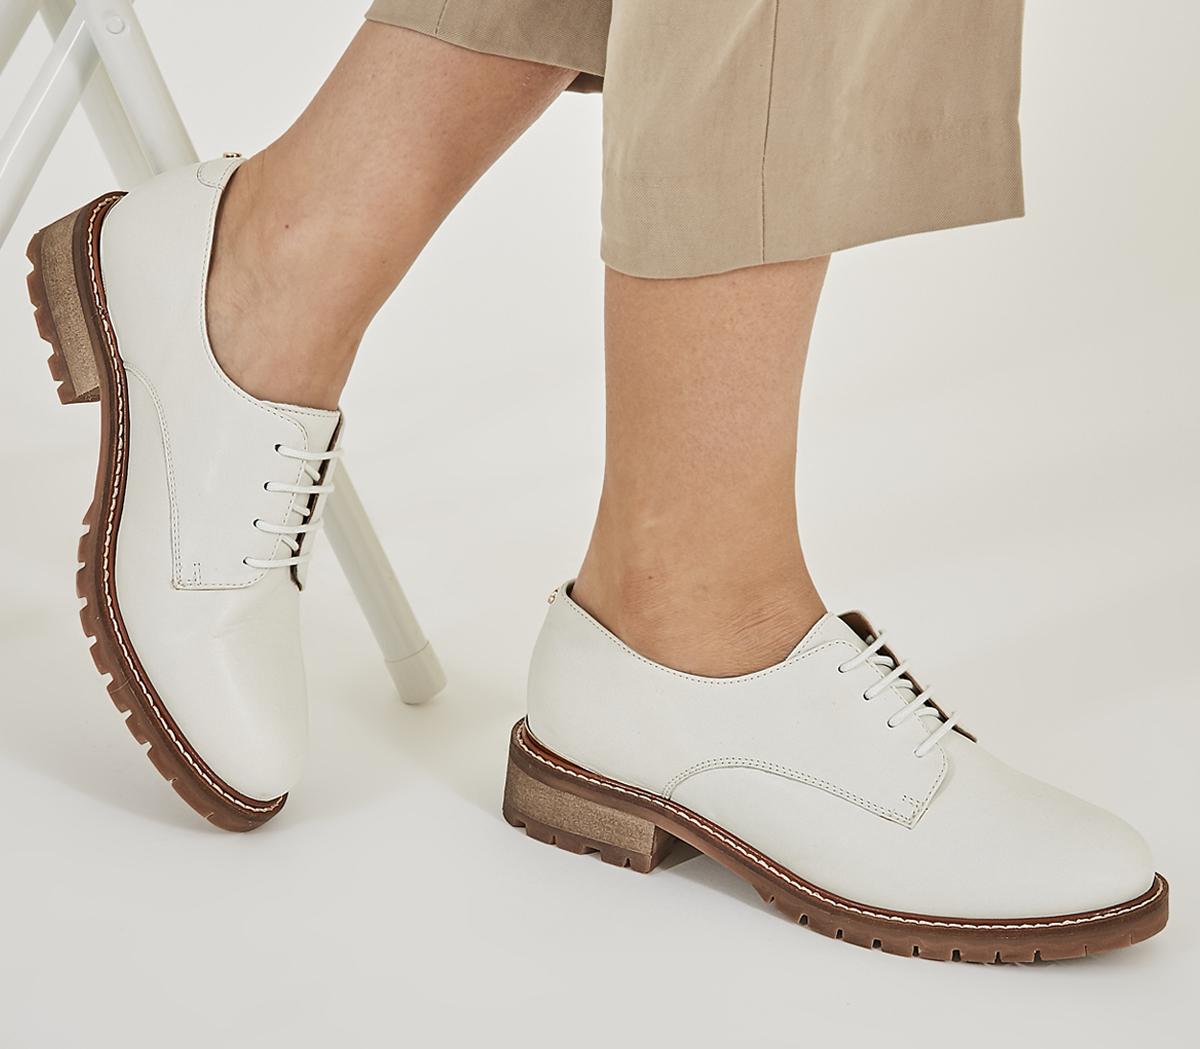 OFFICEKennedy FlatsWhite Leather With Heel Clip